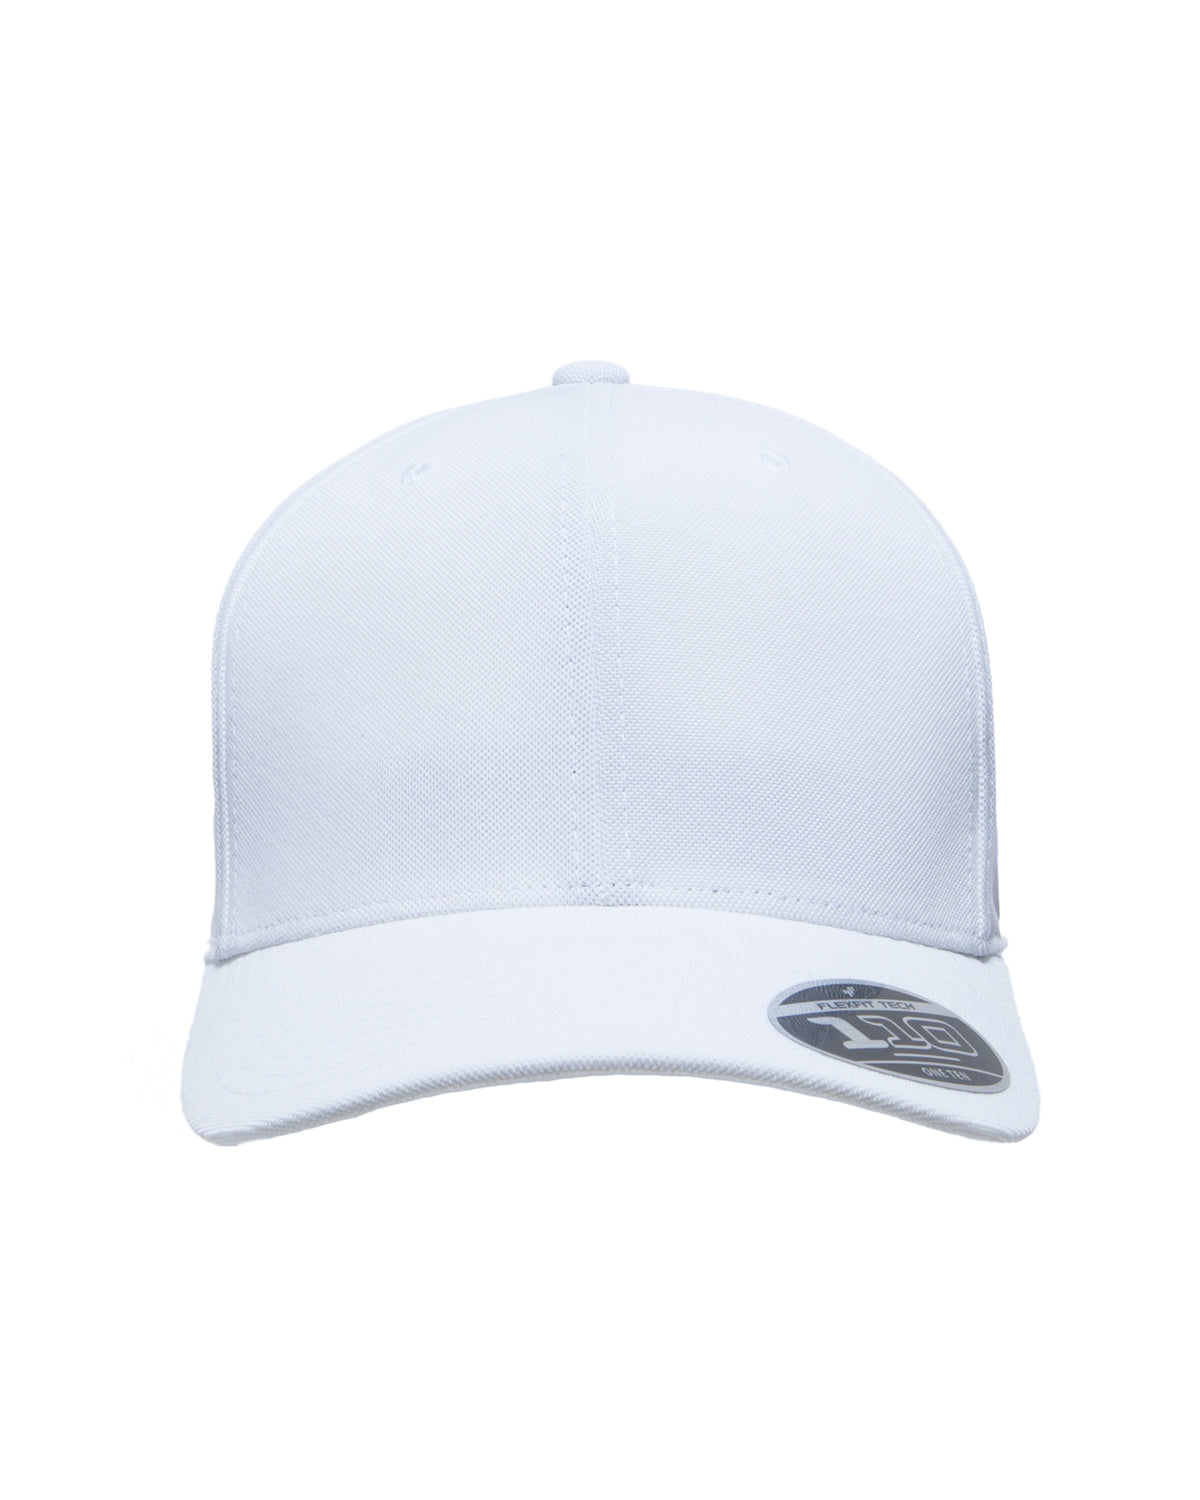 Team 365 ATB100 Mens Cool & Dry Moisture Wicking Adjustable Hat White Front